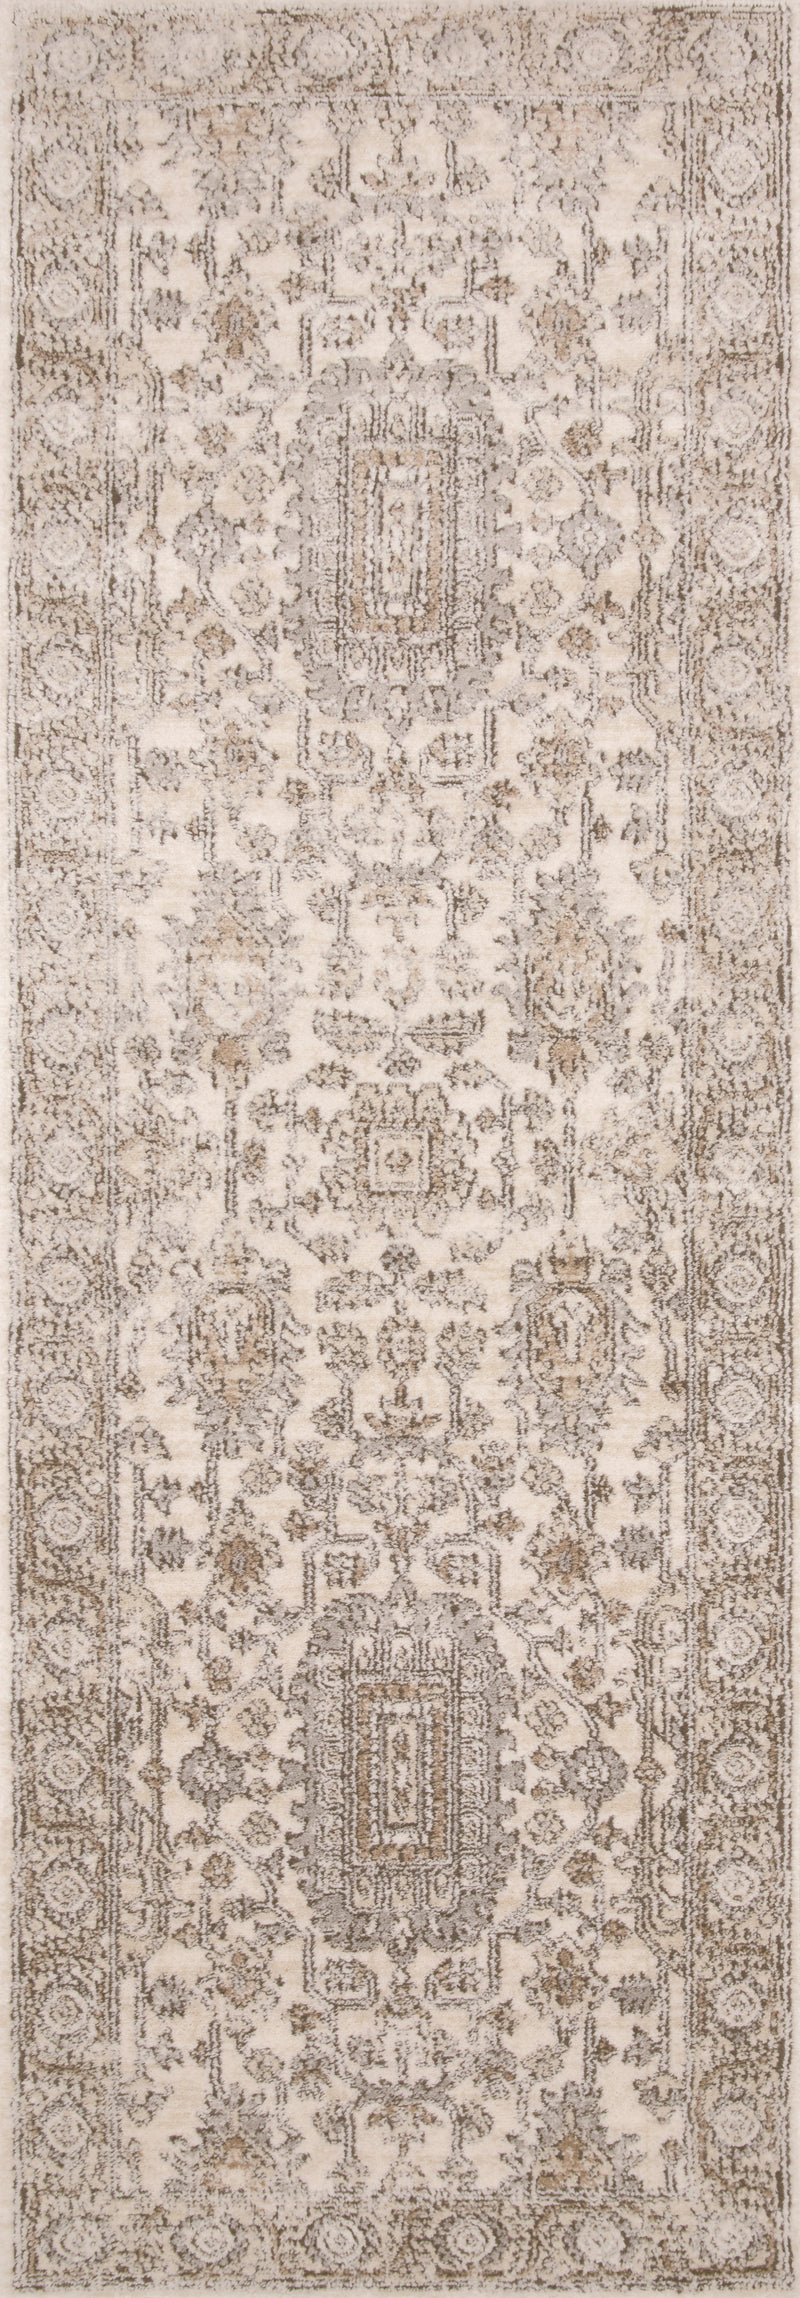 media image for Teagan Rug in Ivory / Sand by Loloi II 271